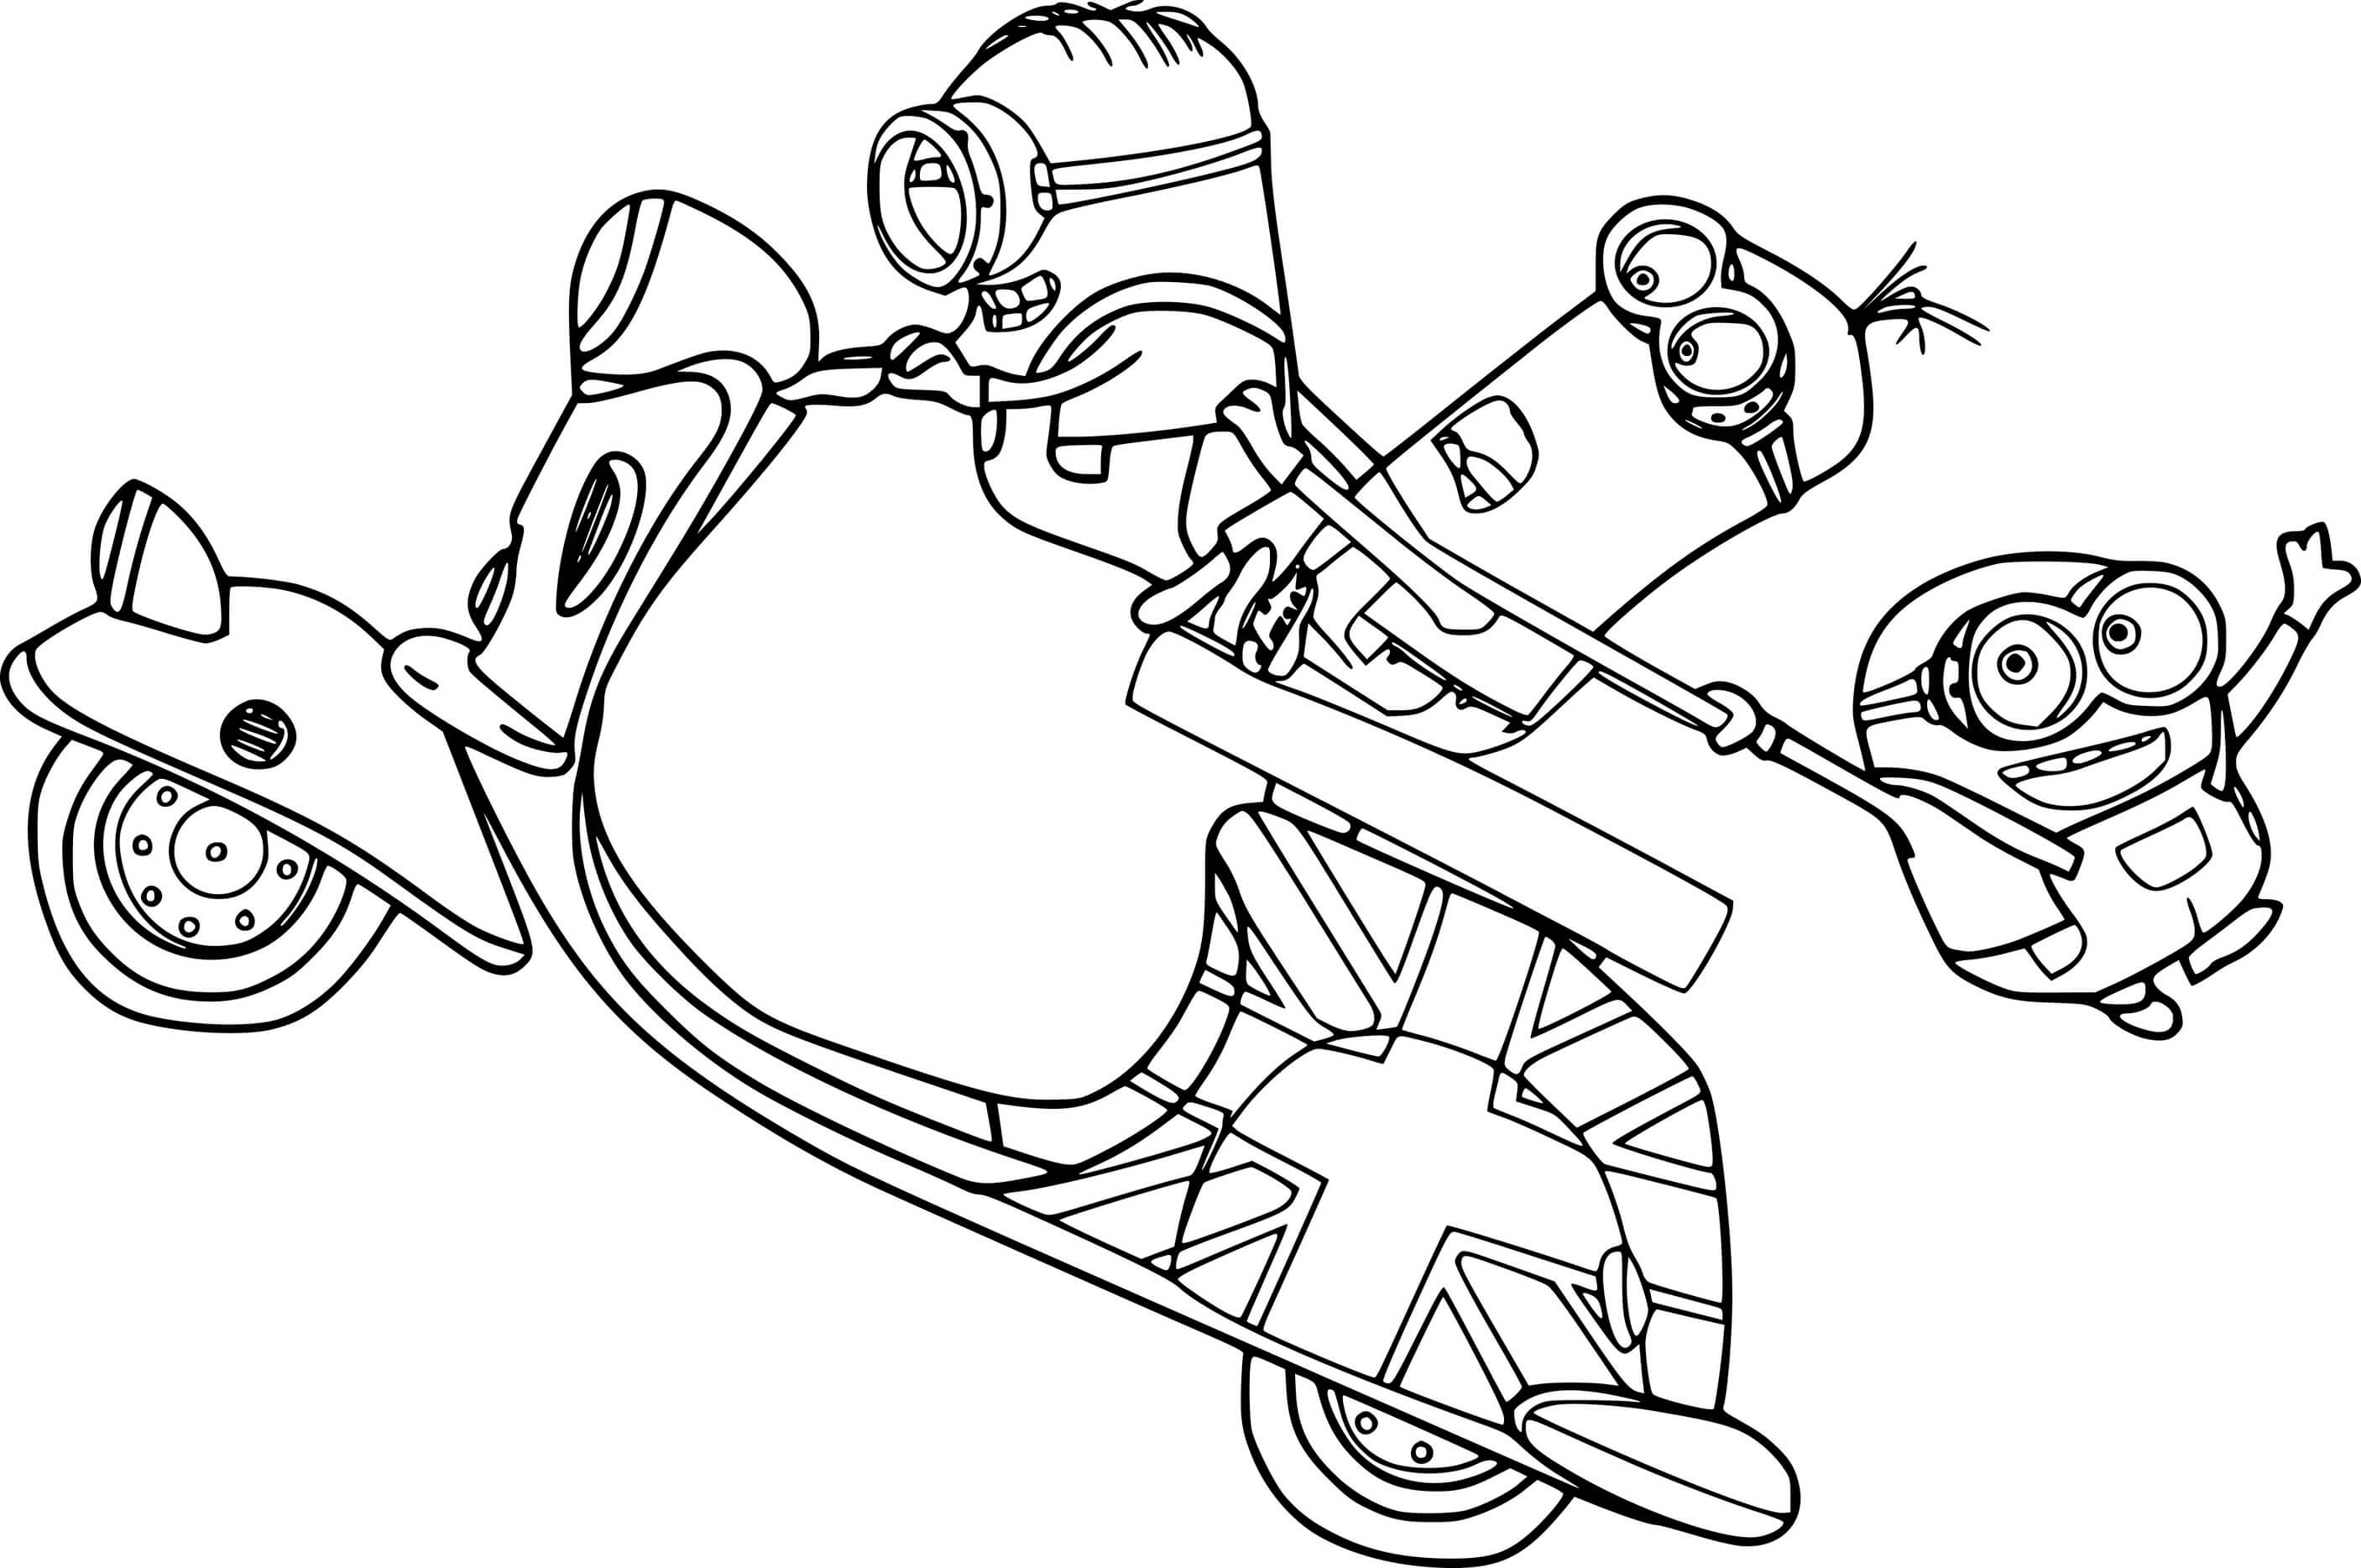 Minions On The Motorcycle Coloring Page